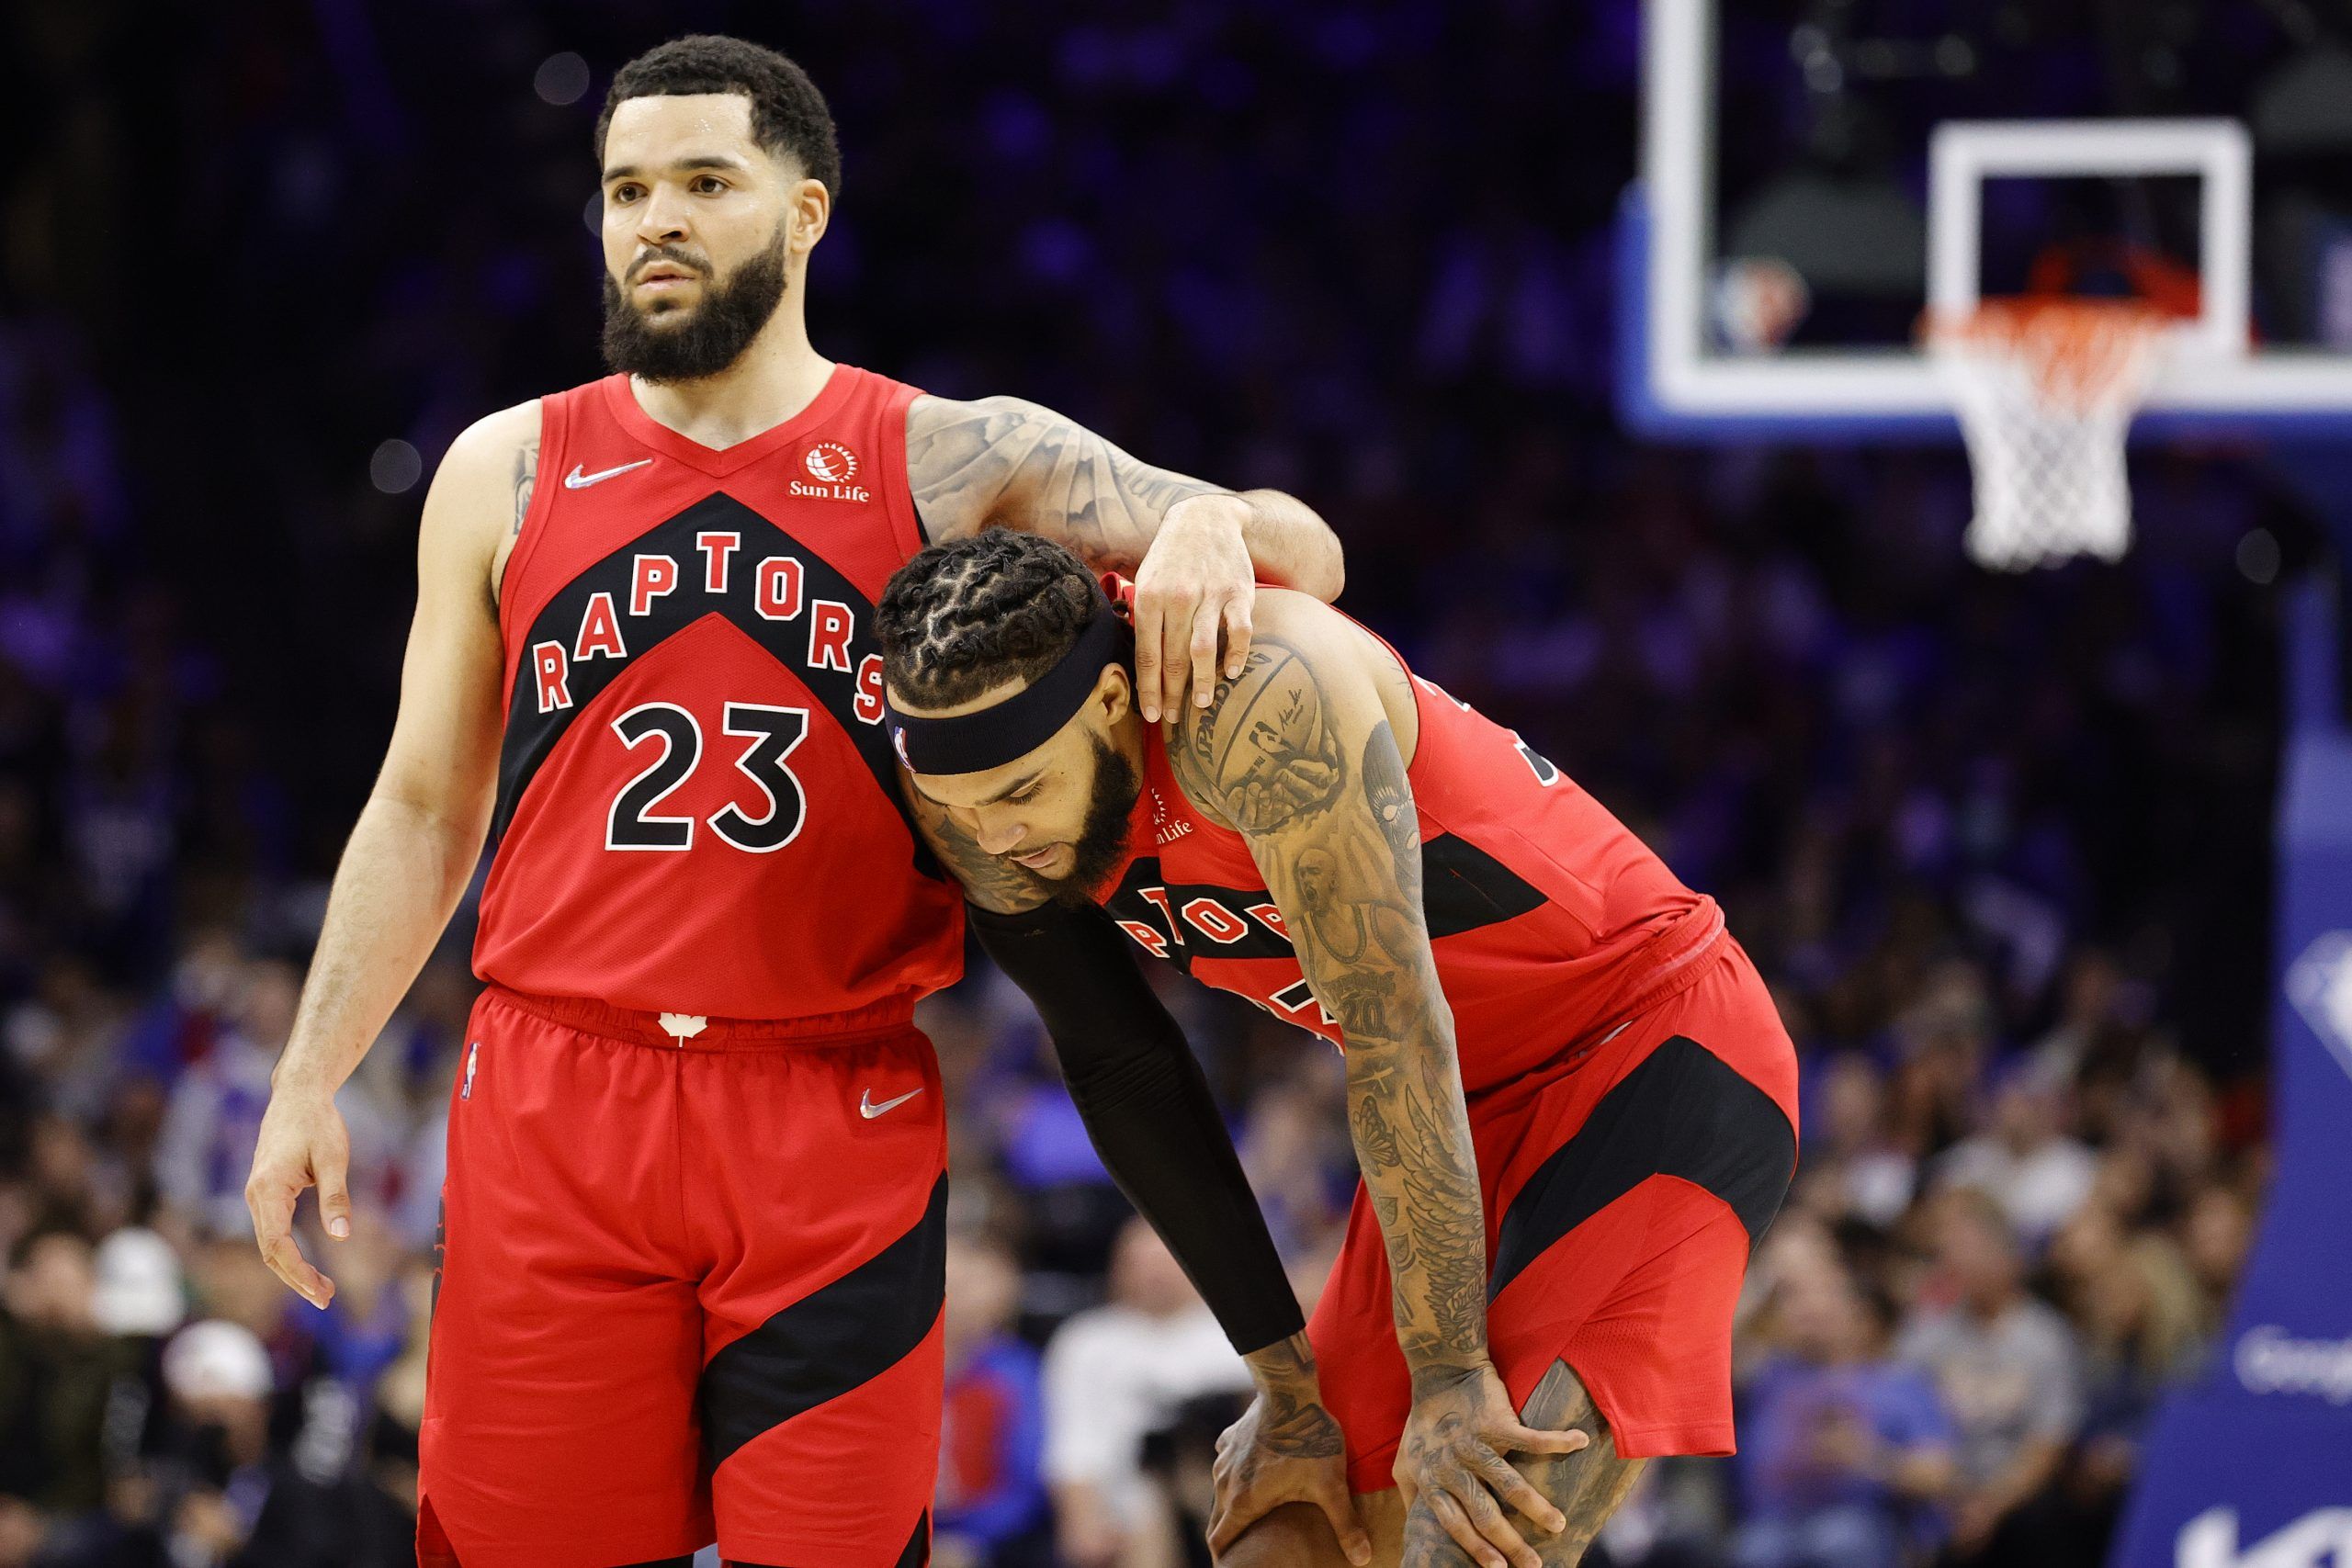 Gary Trent Jr., Thaddeus Young both active for Game 2 of Raptors